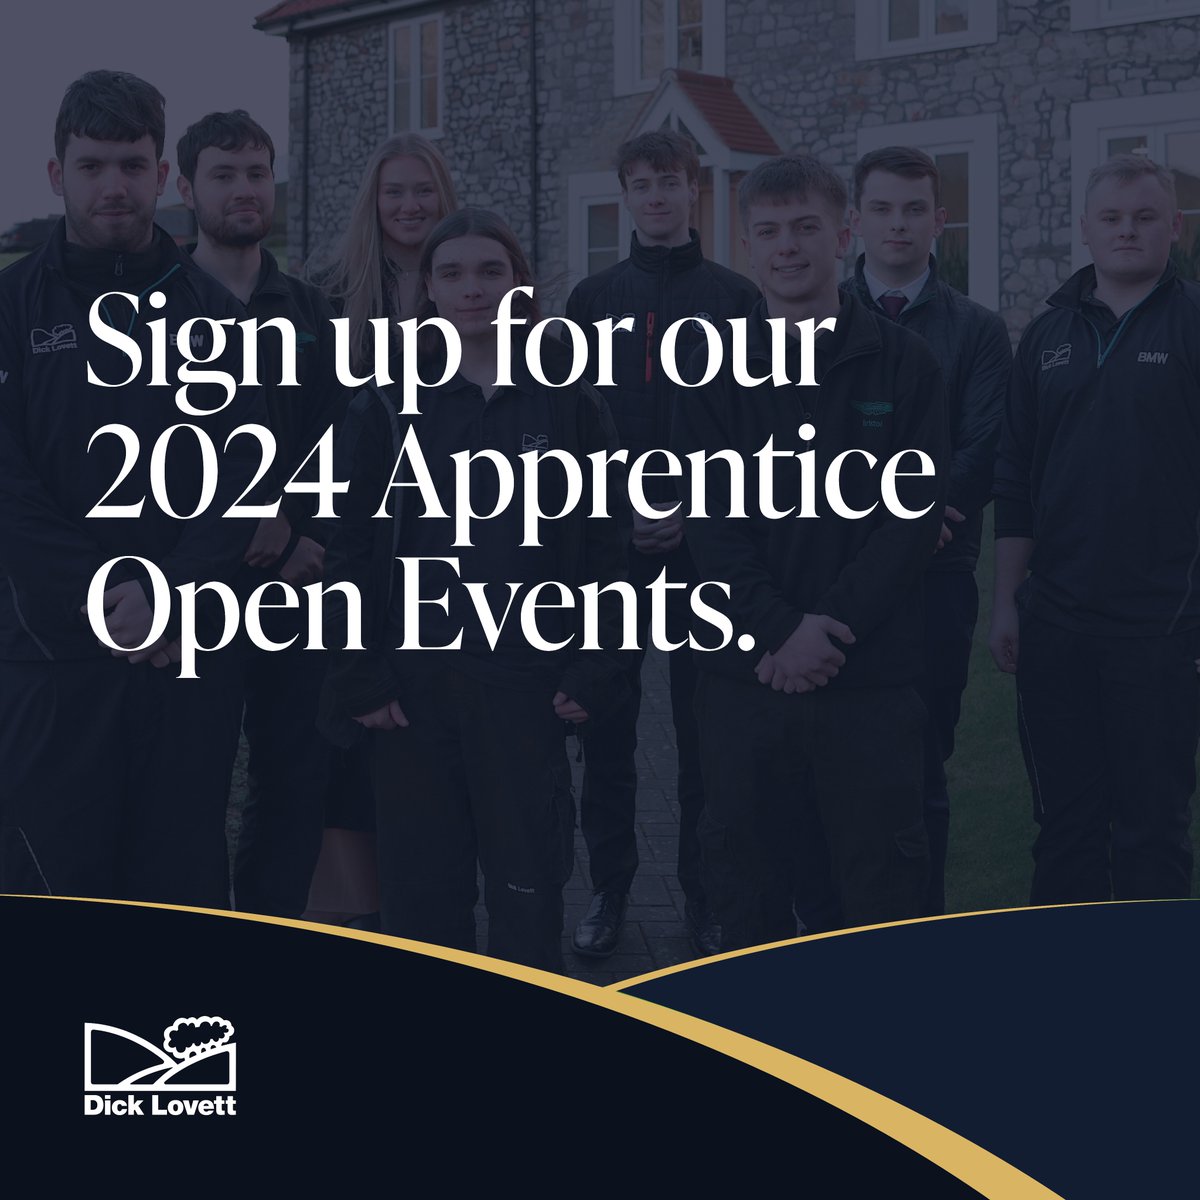 We are thrilled to announce the dates for our Open Events for our 2024 Apprentice Intake. We can’t wait to meet aspiring Apprentices to showcase our amazing facilities and tell you more about Apprenticeships in the automotive industry. Sign up: tinyurl.com/46xa2jd4